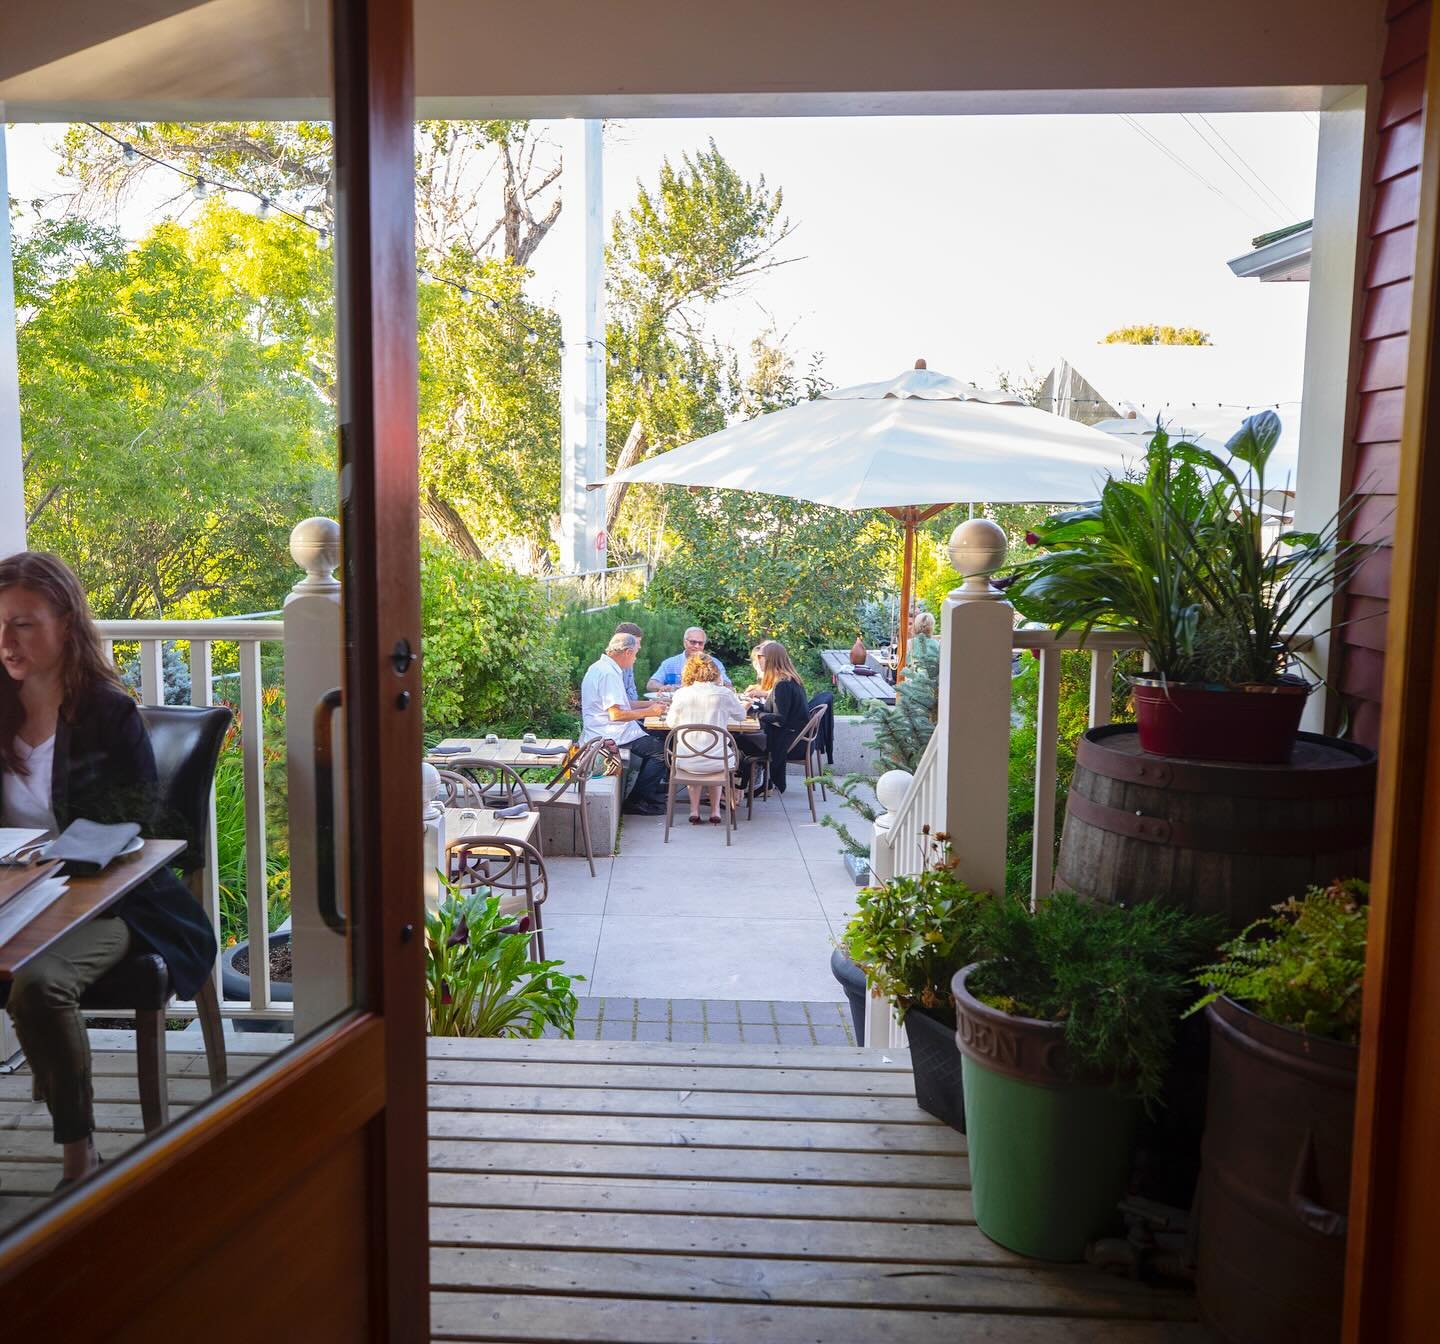 Patio times are definitely here to stay. ☀️ Your weekend starts now with lunch at 11:30am right into happy hour at 3pm. 

#deanehouseyyc #yycpatio #yyclunch #yycdinner #yycbrunch #yychappyhour